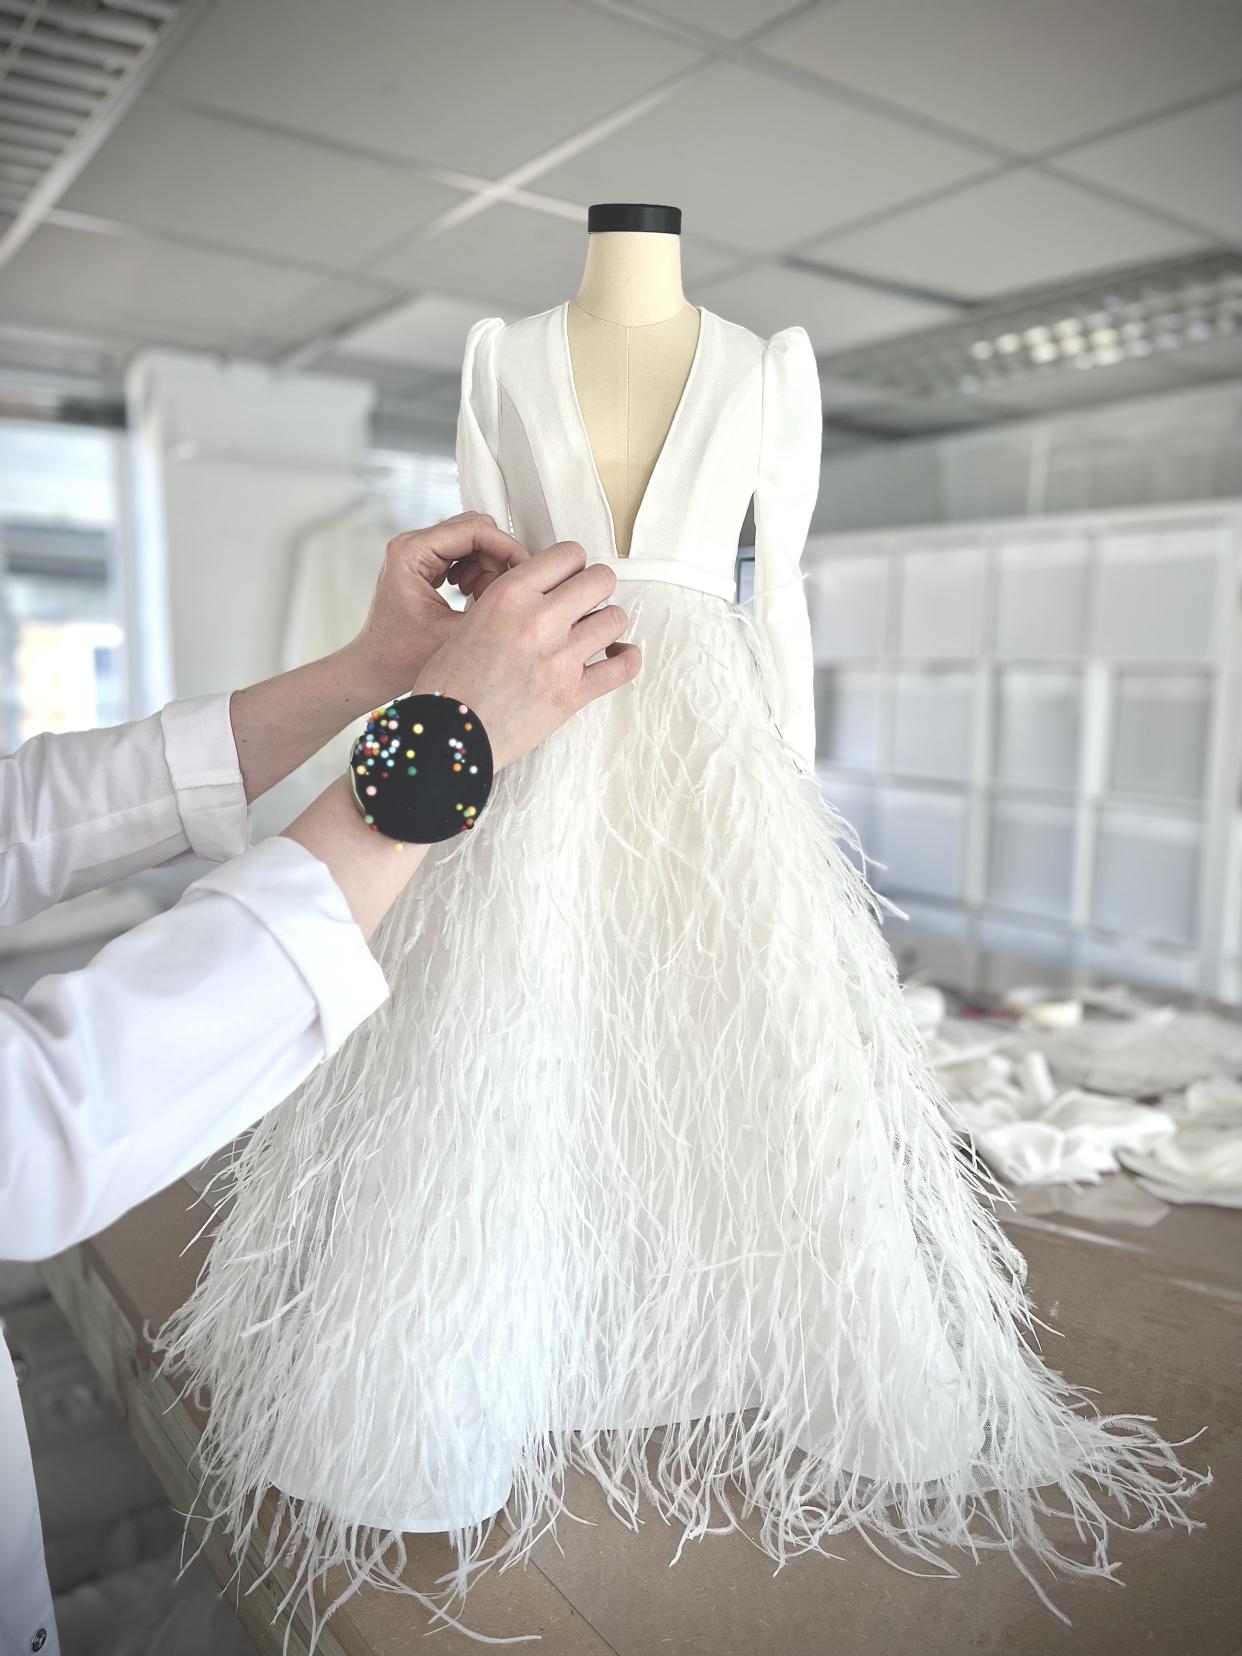 The company transforms silk robes and slips, to dress miniatures or newborn gowns. Photo: The Modiste